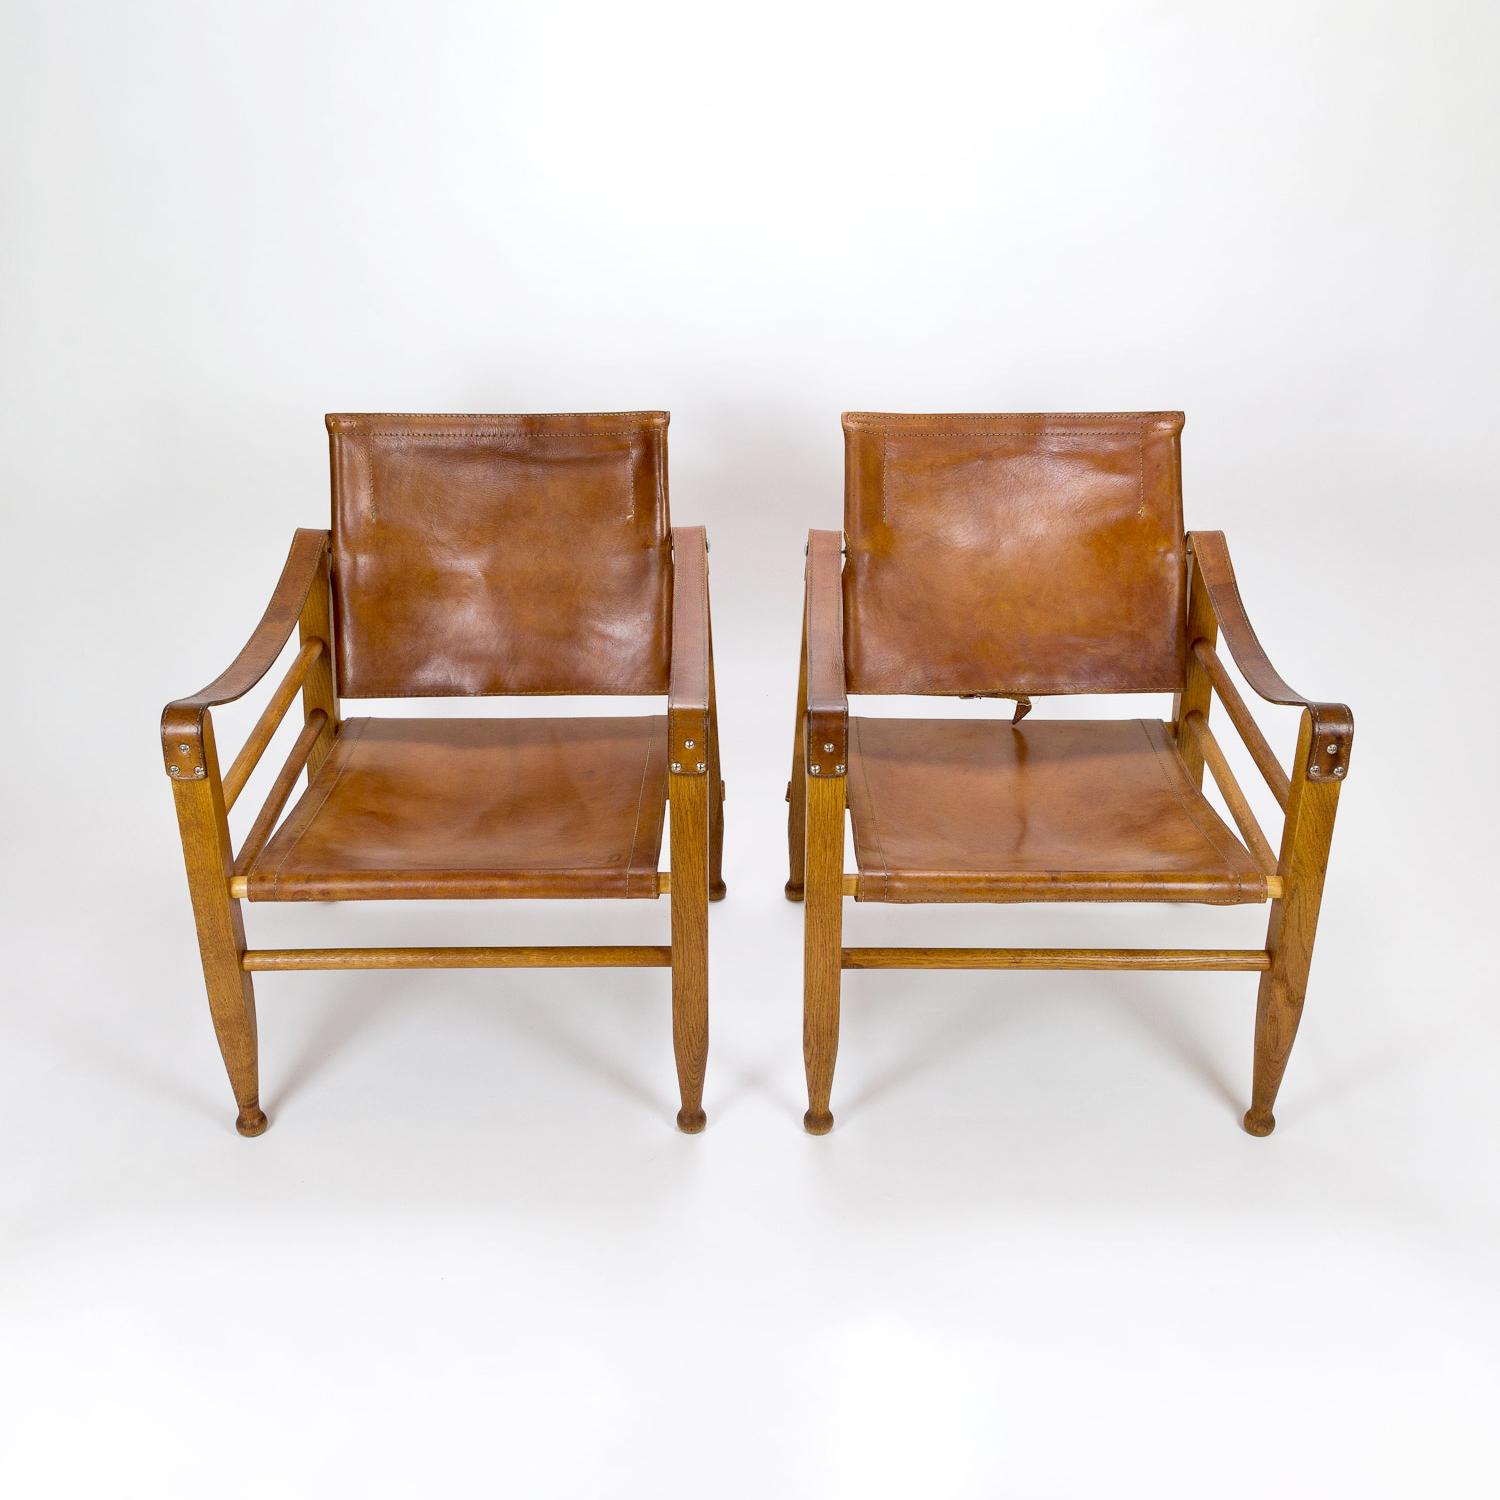 An early pair of midcentury Aage Bruun & Søn Safari chairs in patinated cognac leather and solid oak. Excellent patina. Denmark, 1960s.